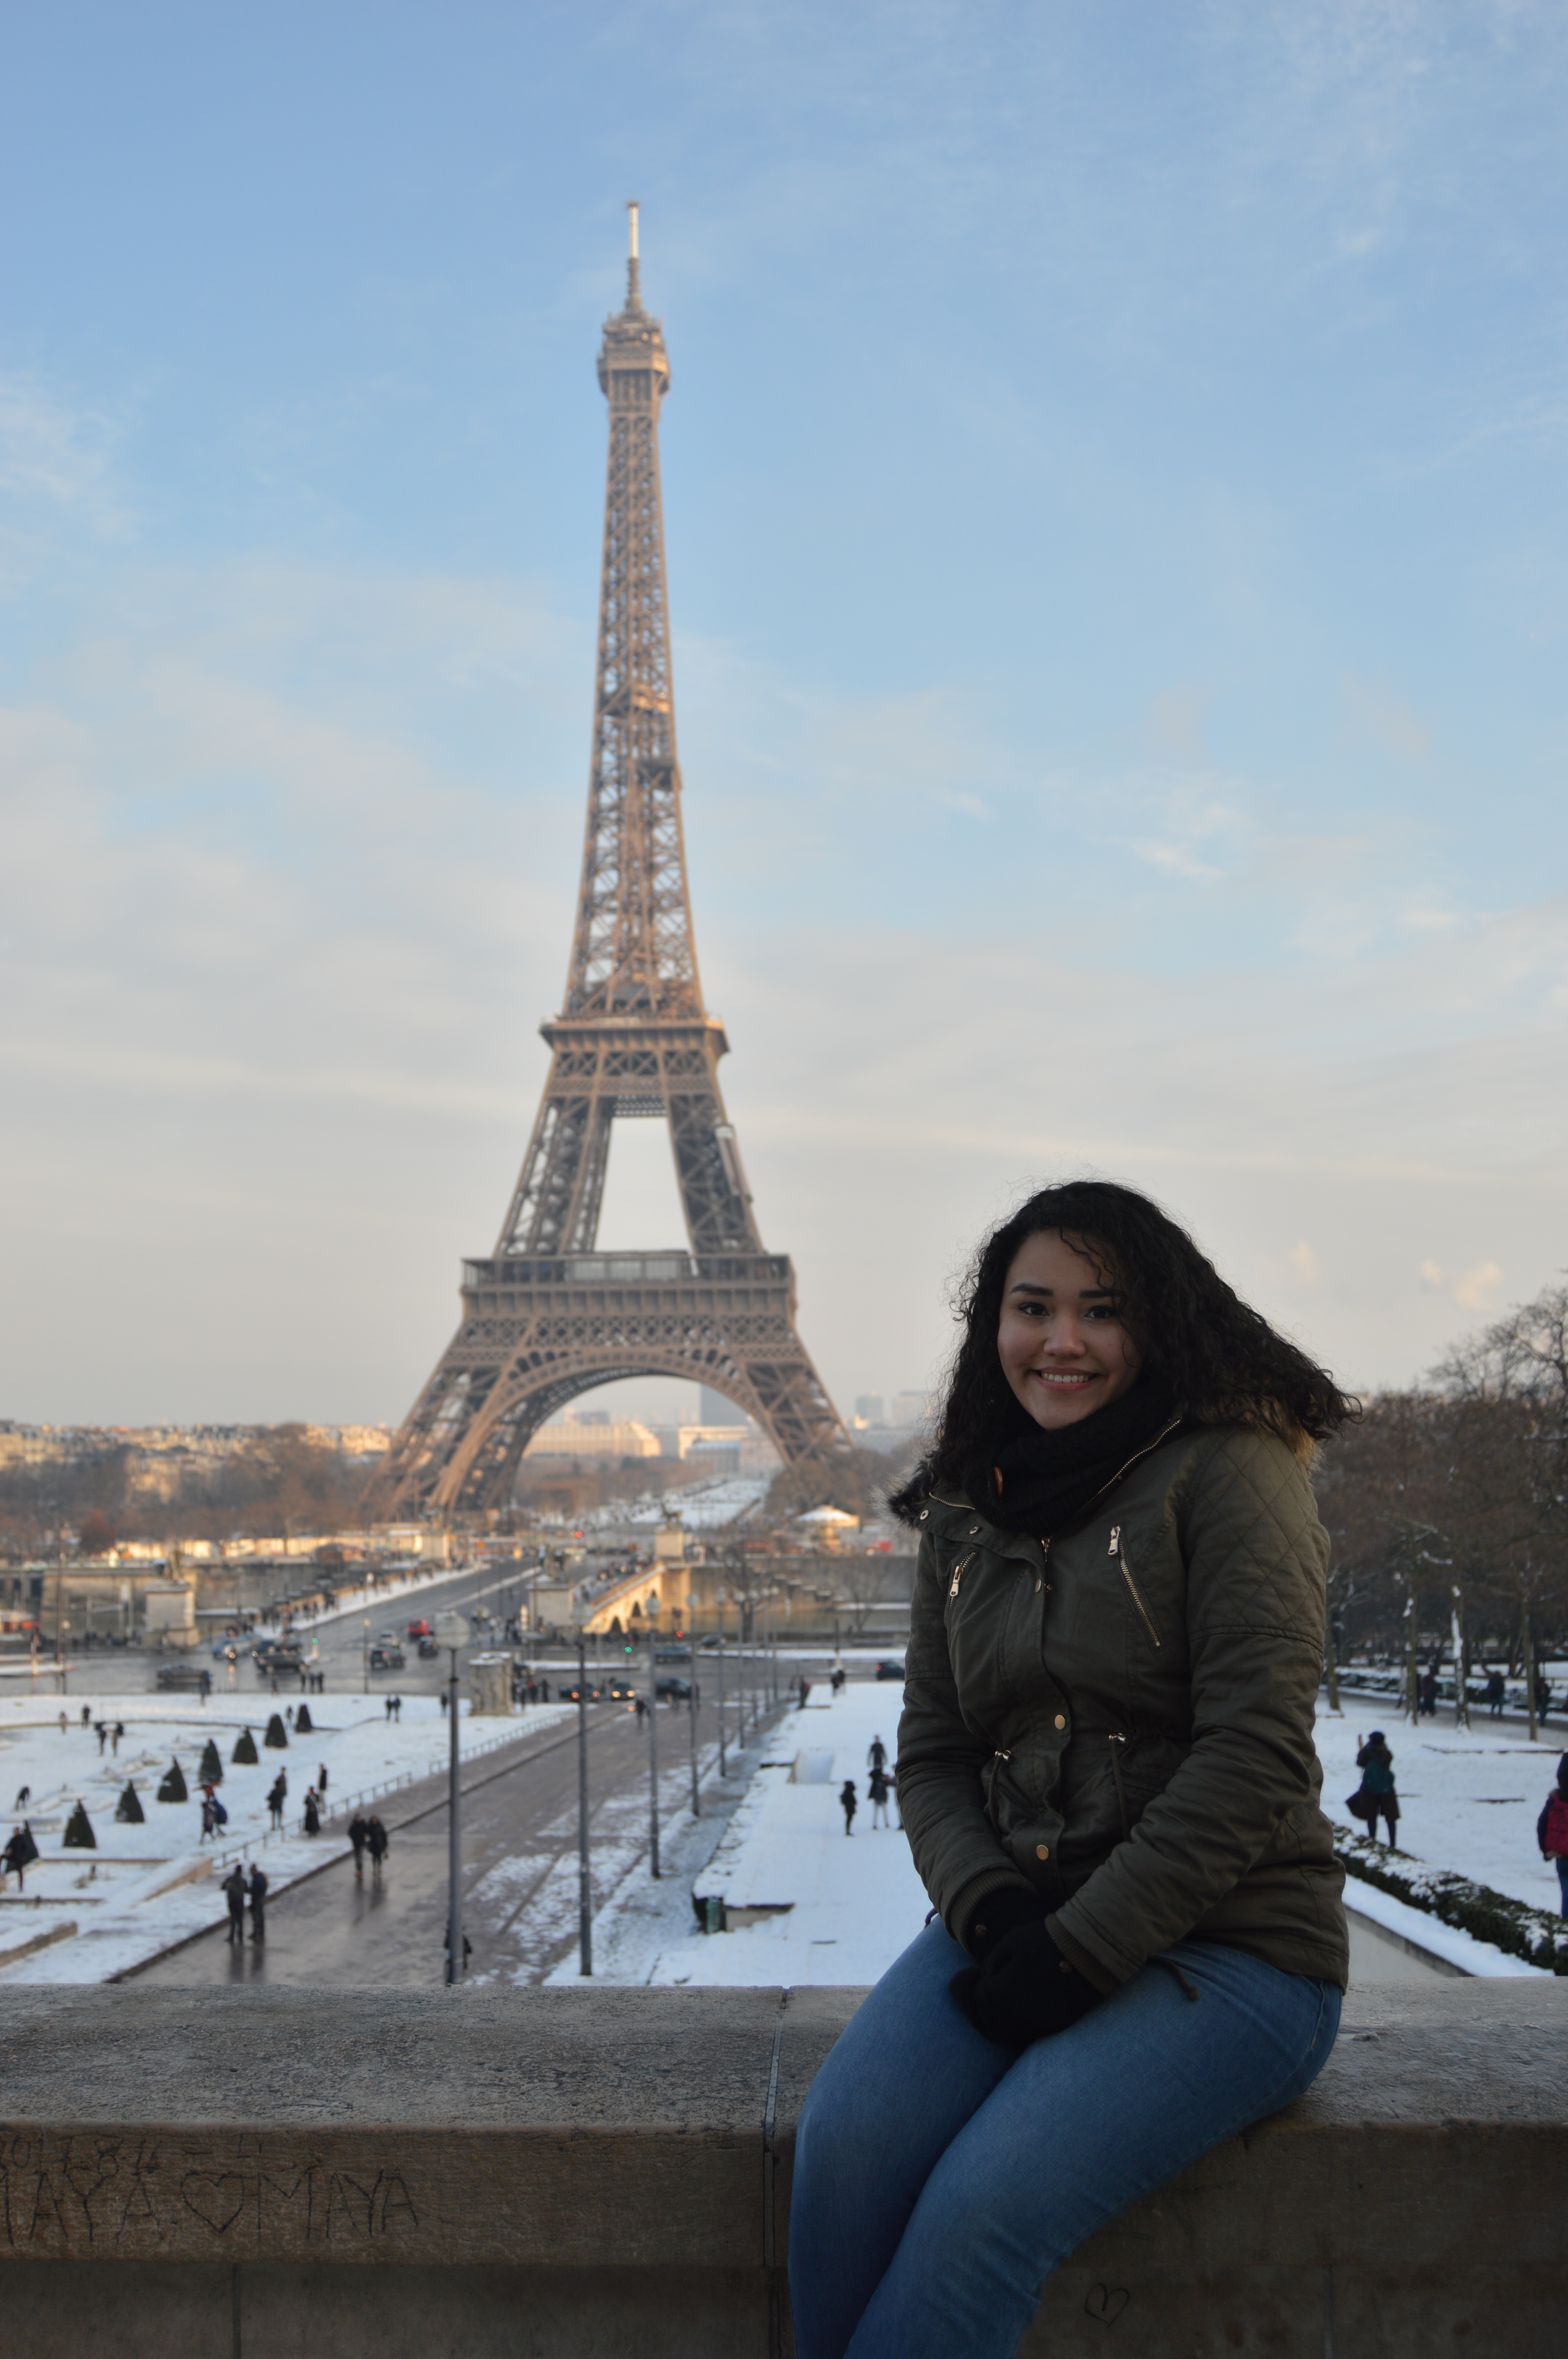 Student posing in front of the Eiffel Tower in Paris with snow